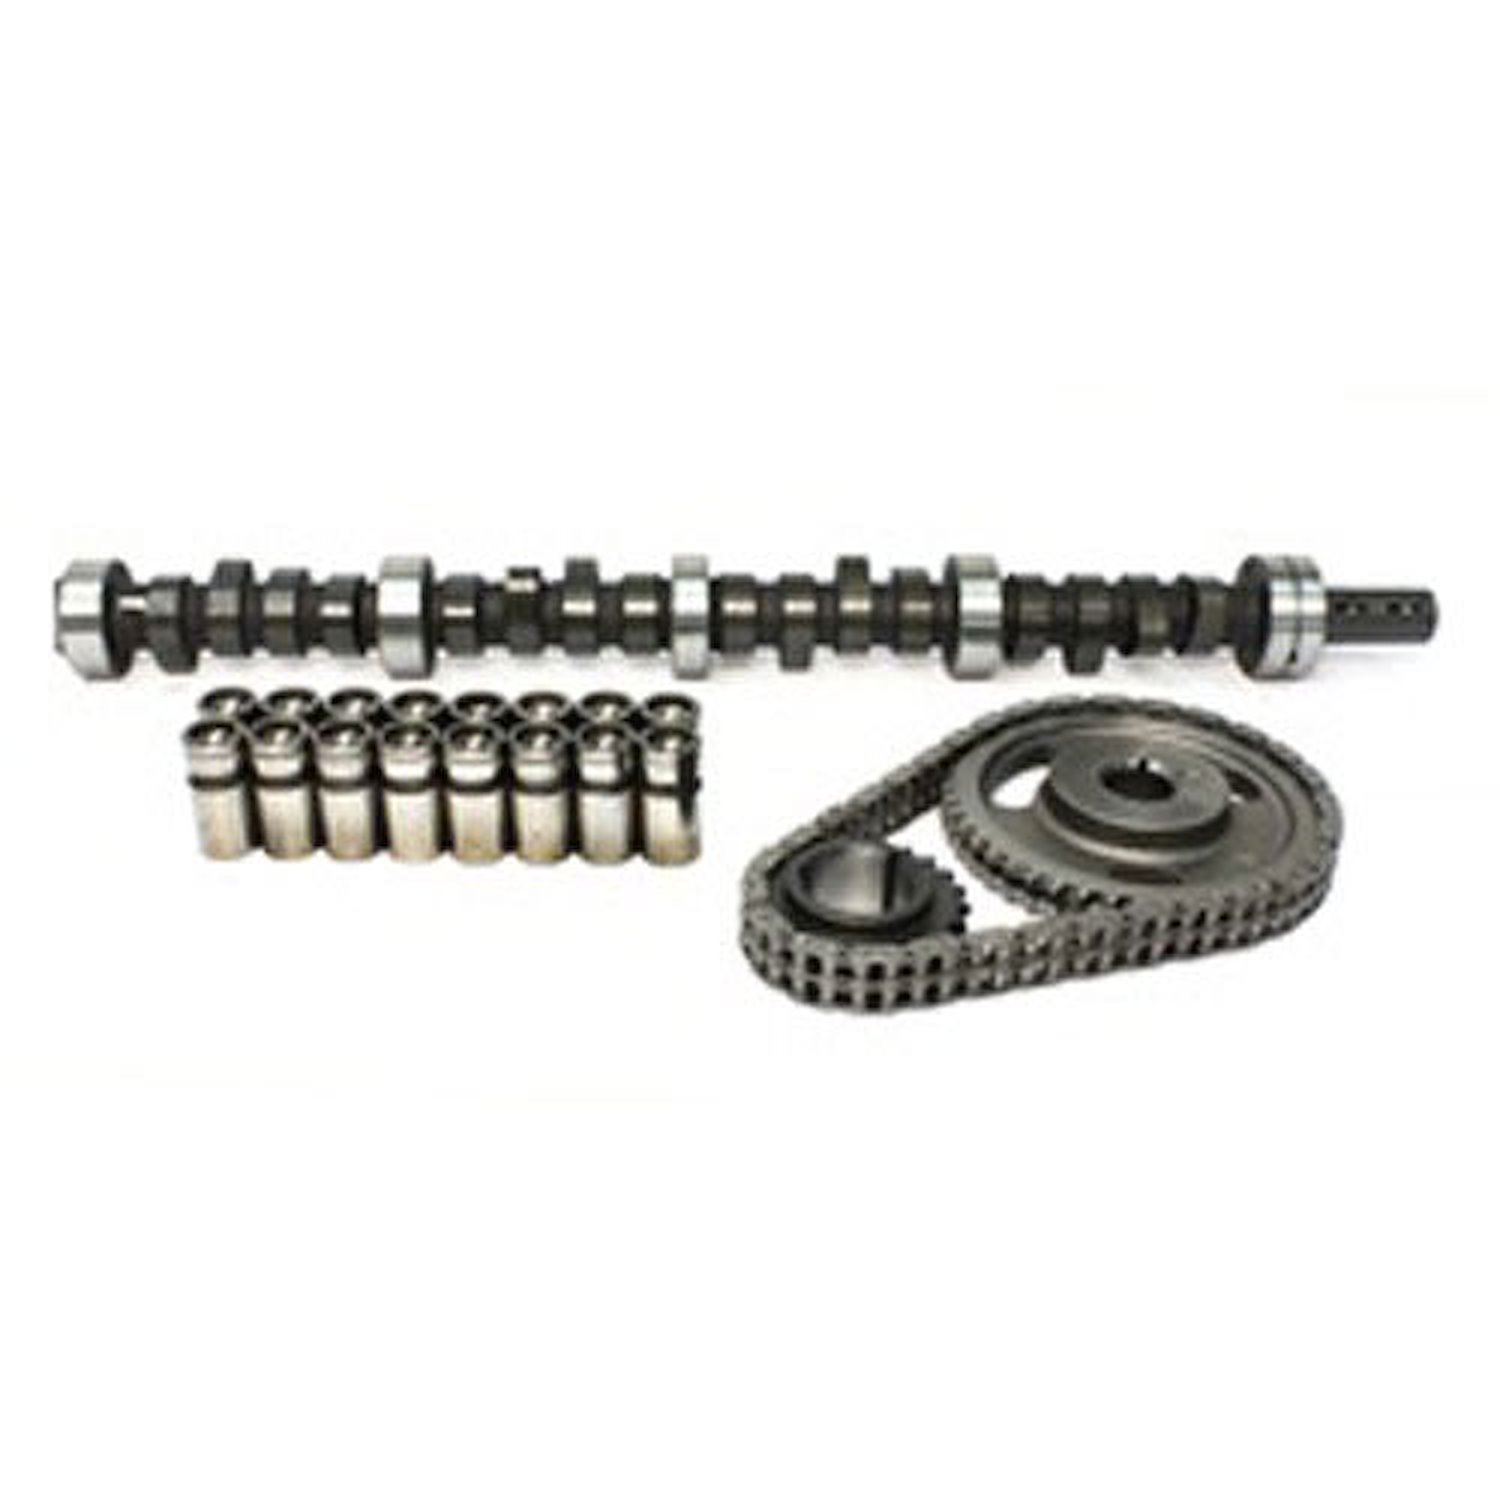 High Energy 252H Hydraulic Flat Tappet Camshaft Small Kit Lift: .433" /.433" Duration: 252°/252° RPM Range: 800-4800